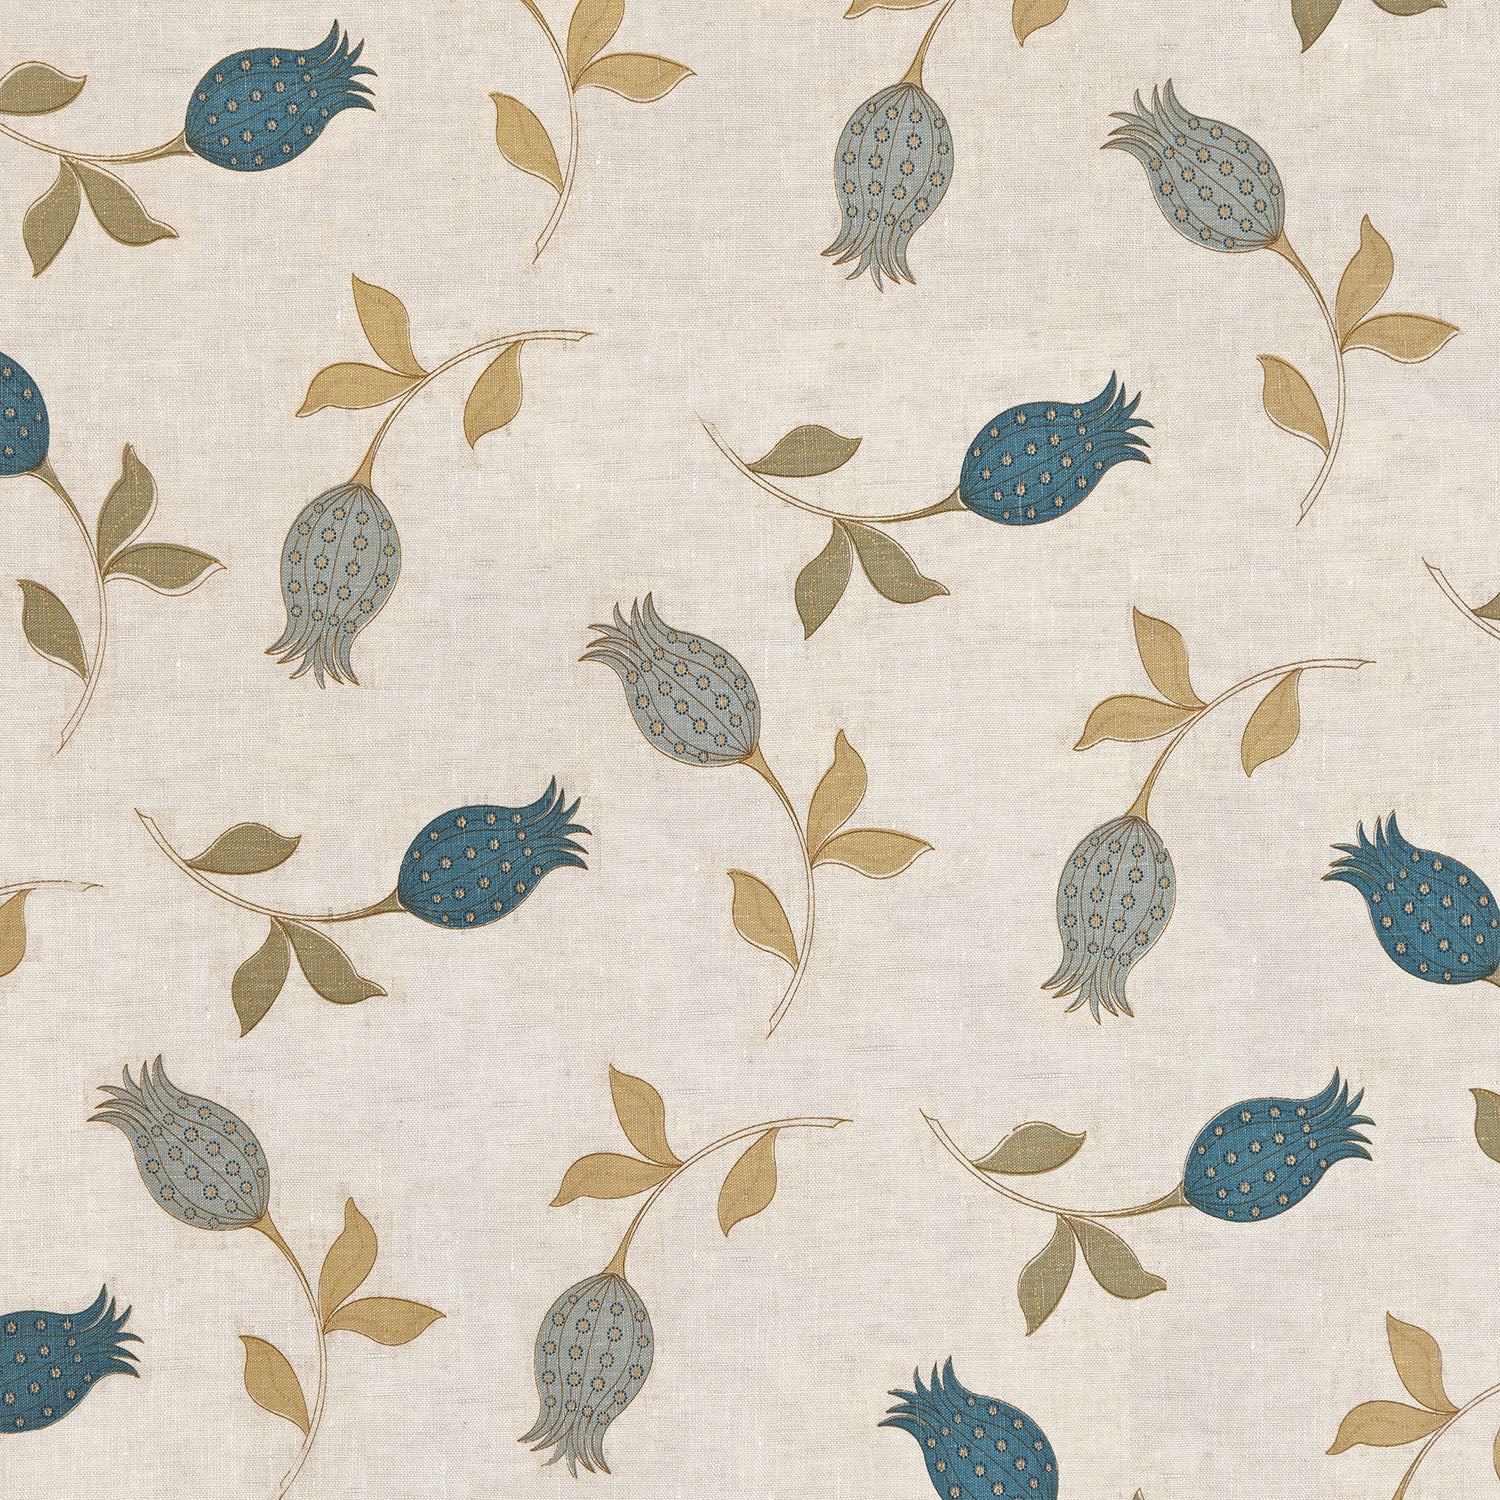 Detail of fabric with a small-scale tulip print in shades of blue and tan on a cream field.